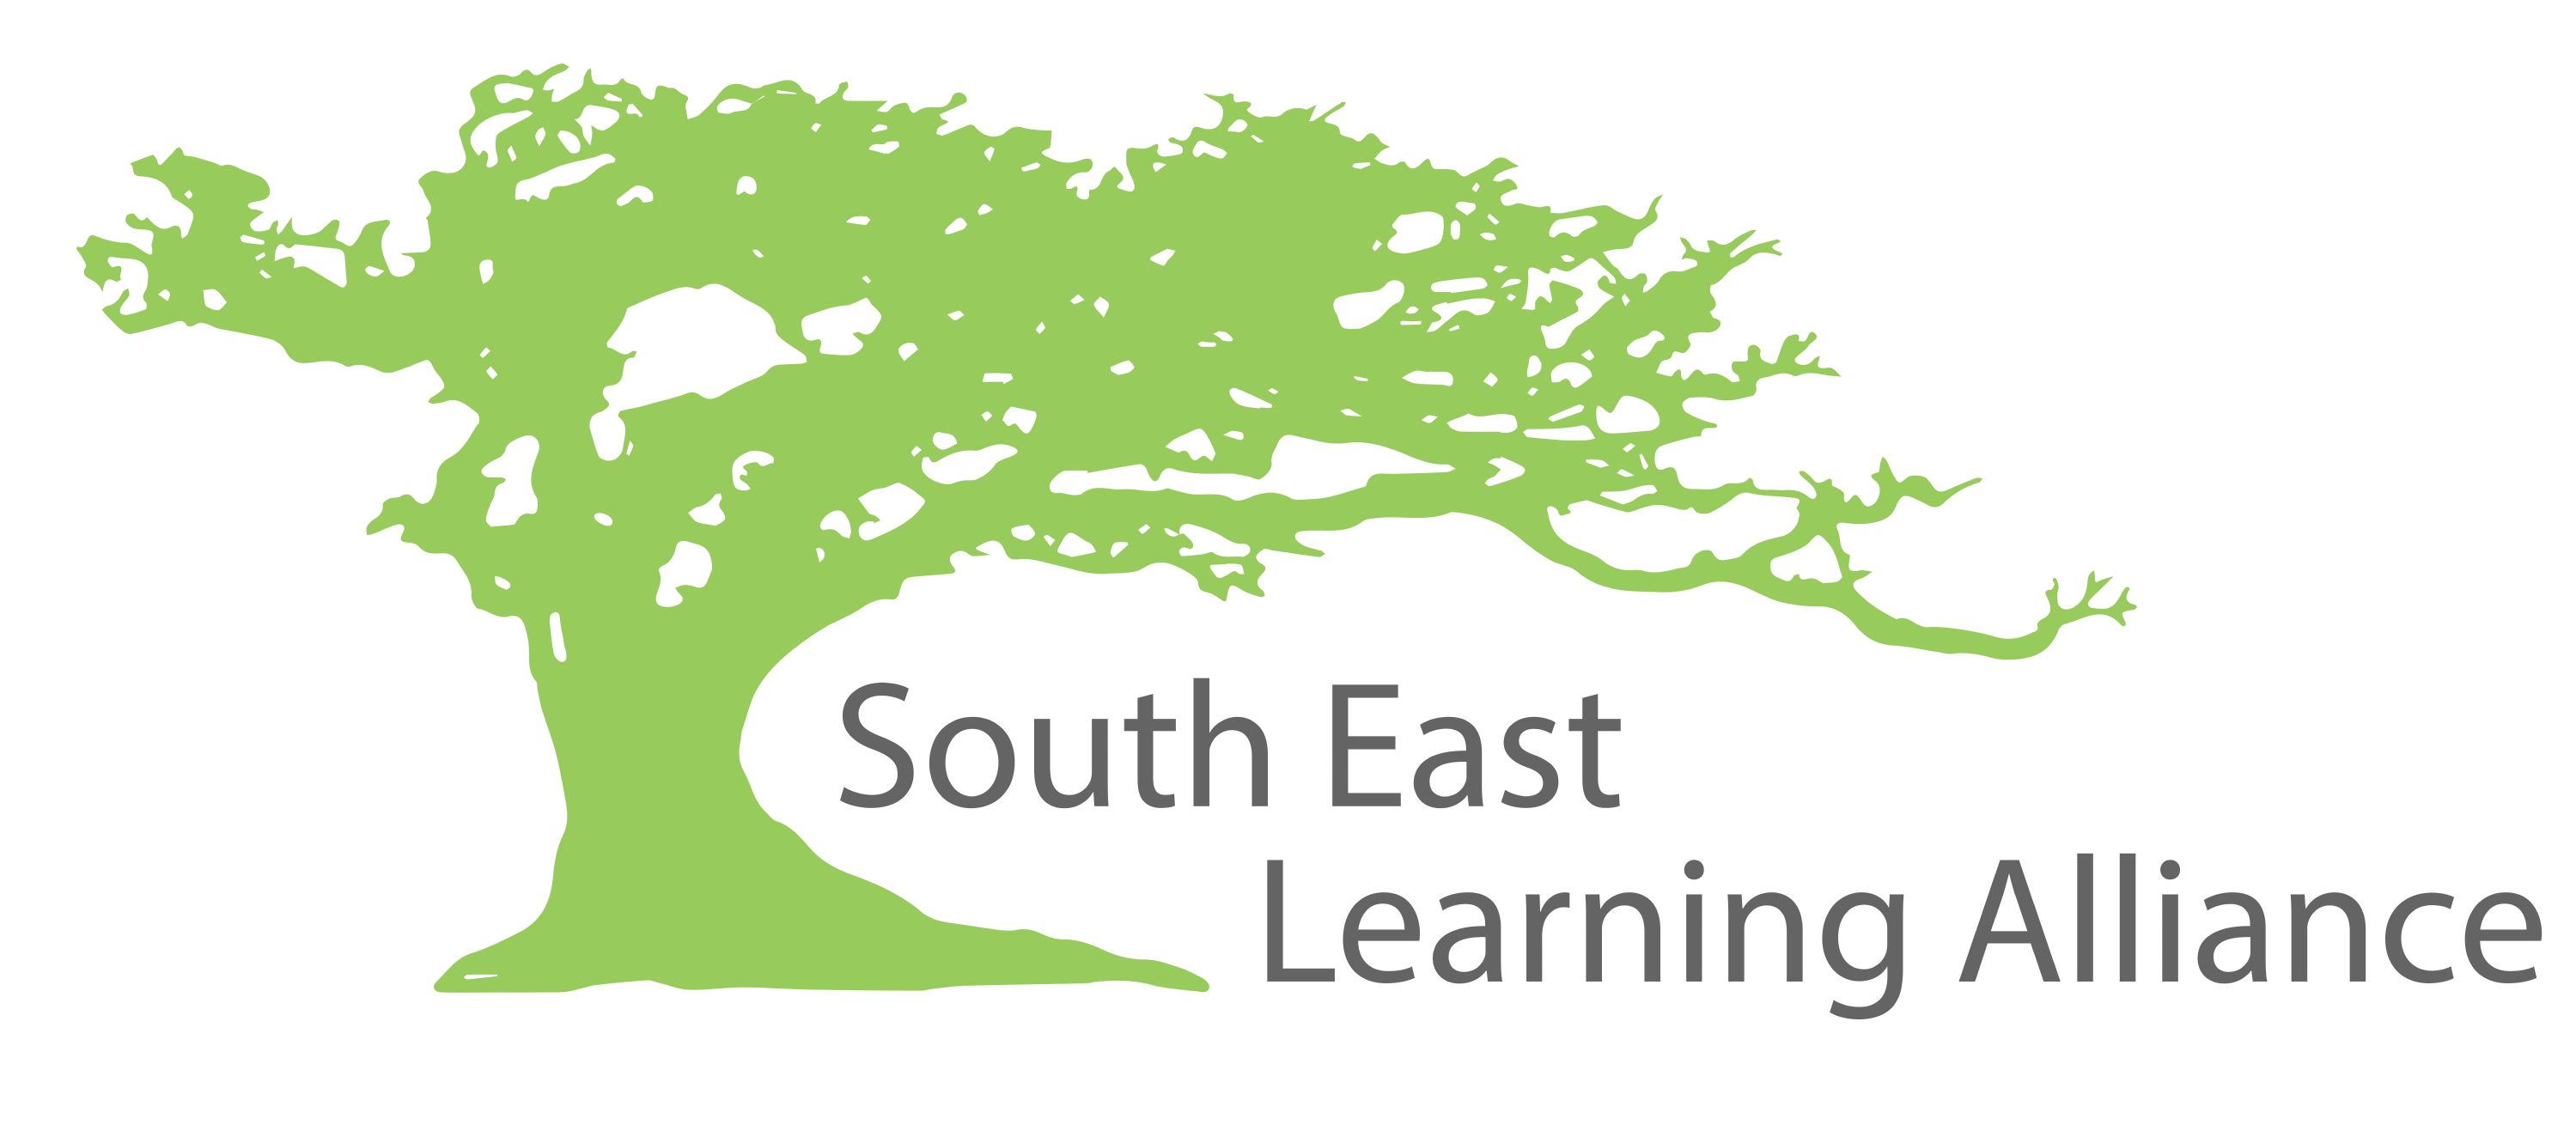 South East Learning Alliance